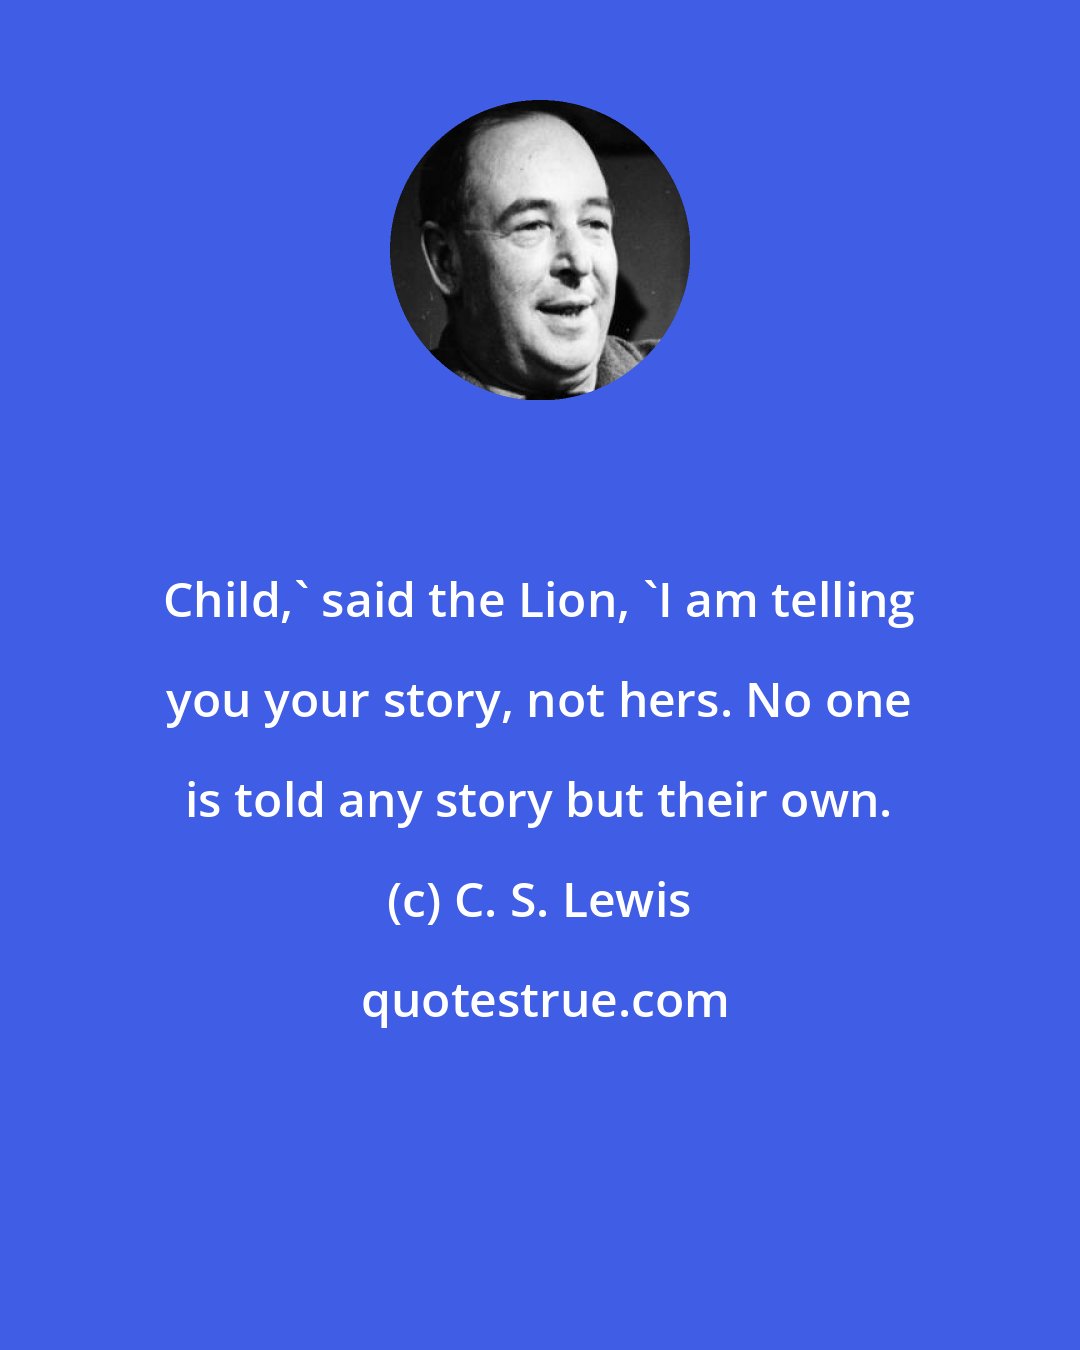 C. S. Lewis: Child,' said the Lion, 'I am telling you your story, not hers. No one is told any story but their own.